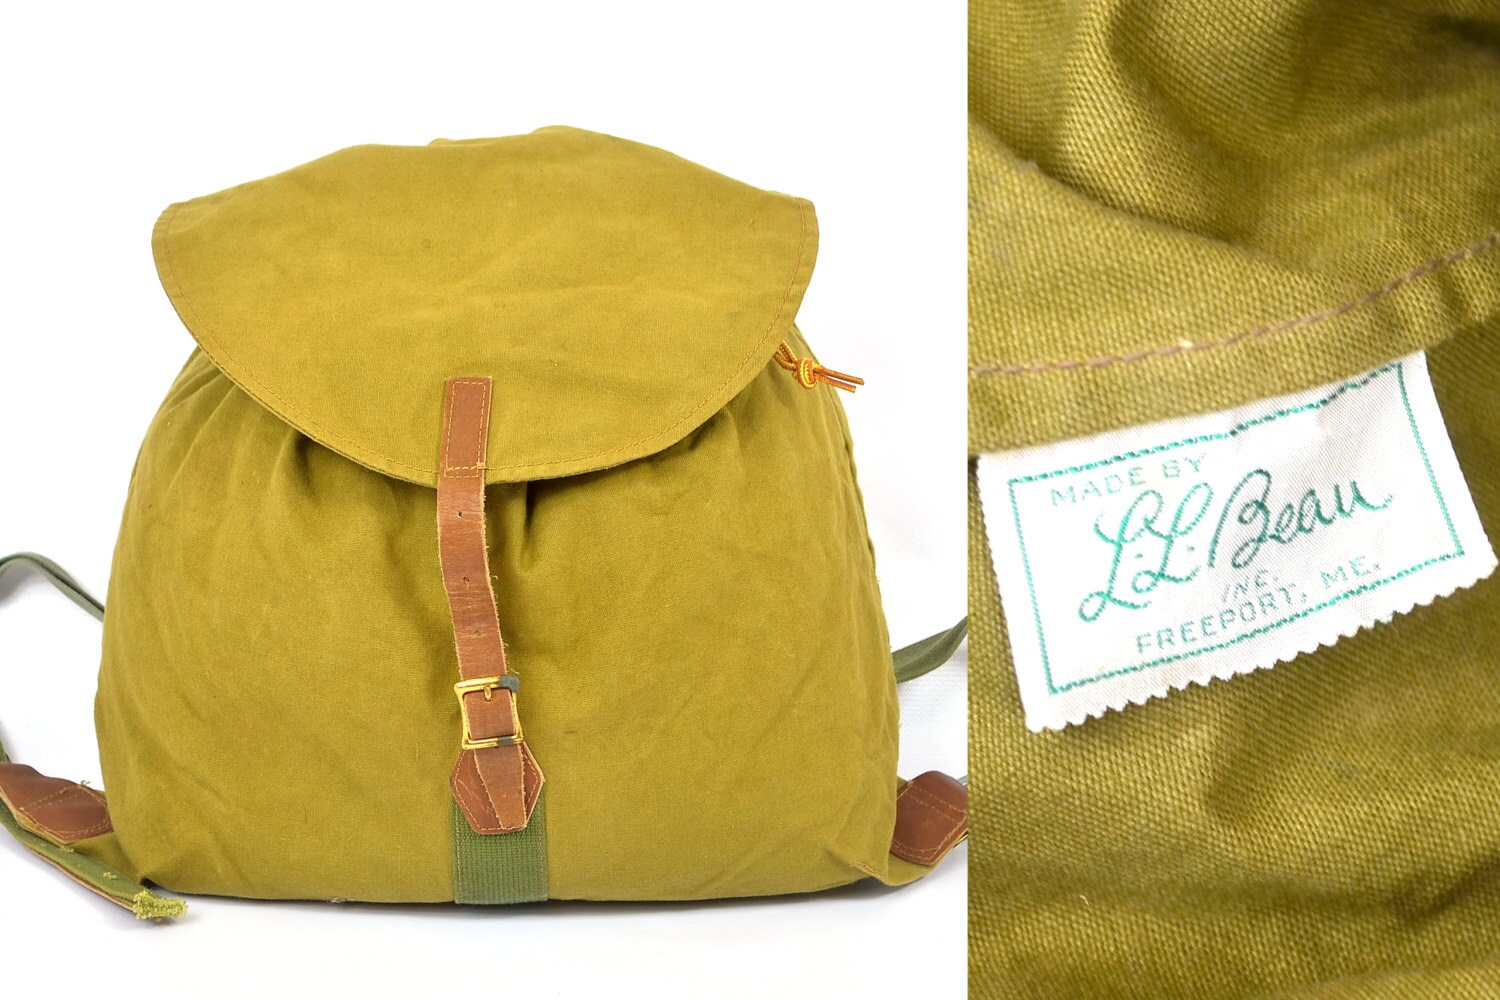 Vintage 1960s Ll Bean Canvas And Leather Rucksack Backpack 1572